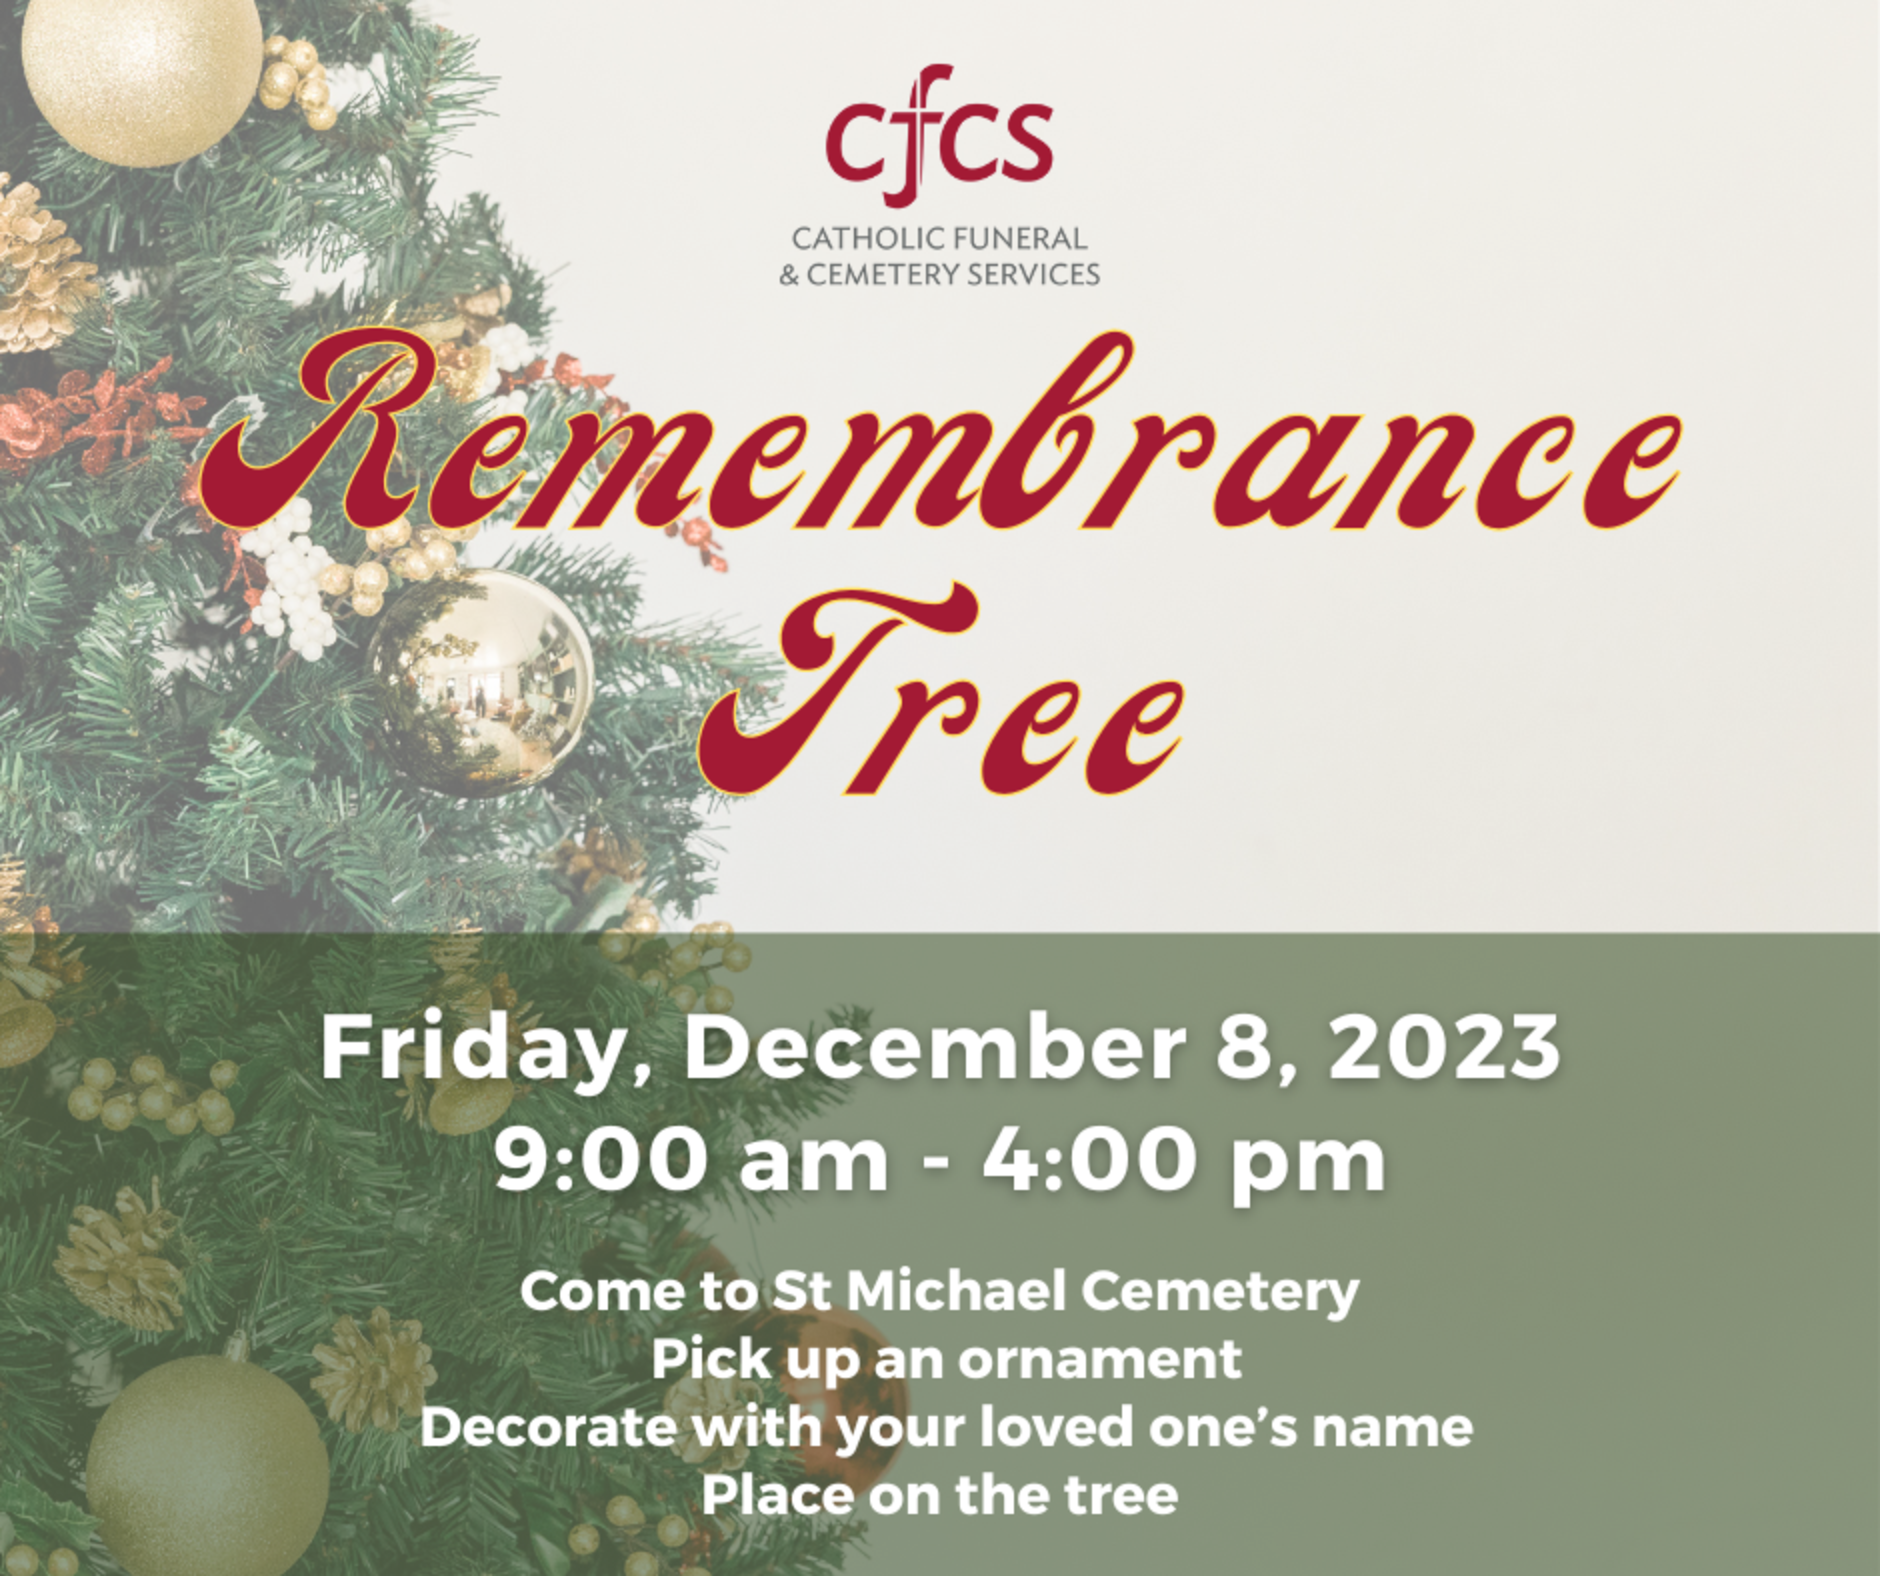 Remembrance Tree Cfcs 1